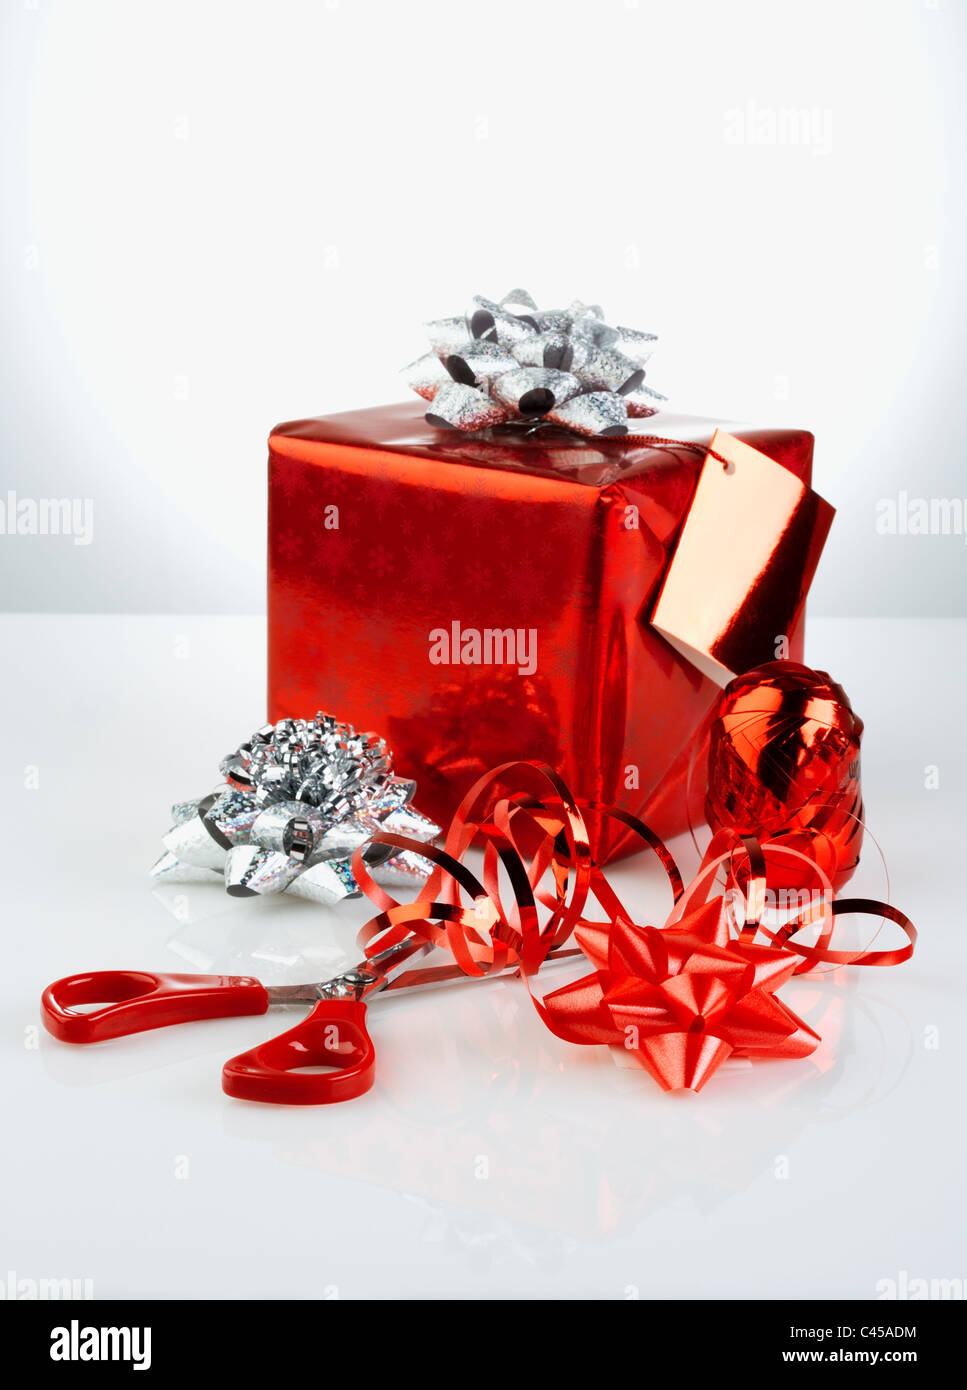 Christmas gift with scissors and ribbons, close-up Stock Photo